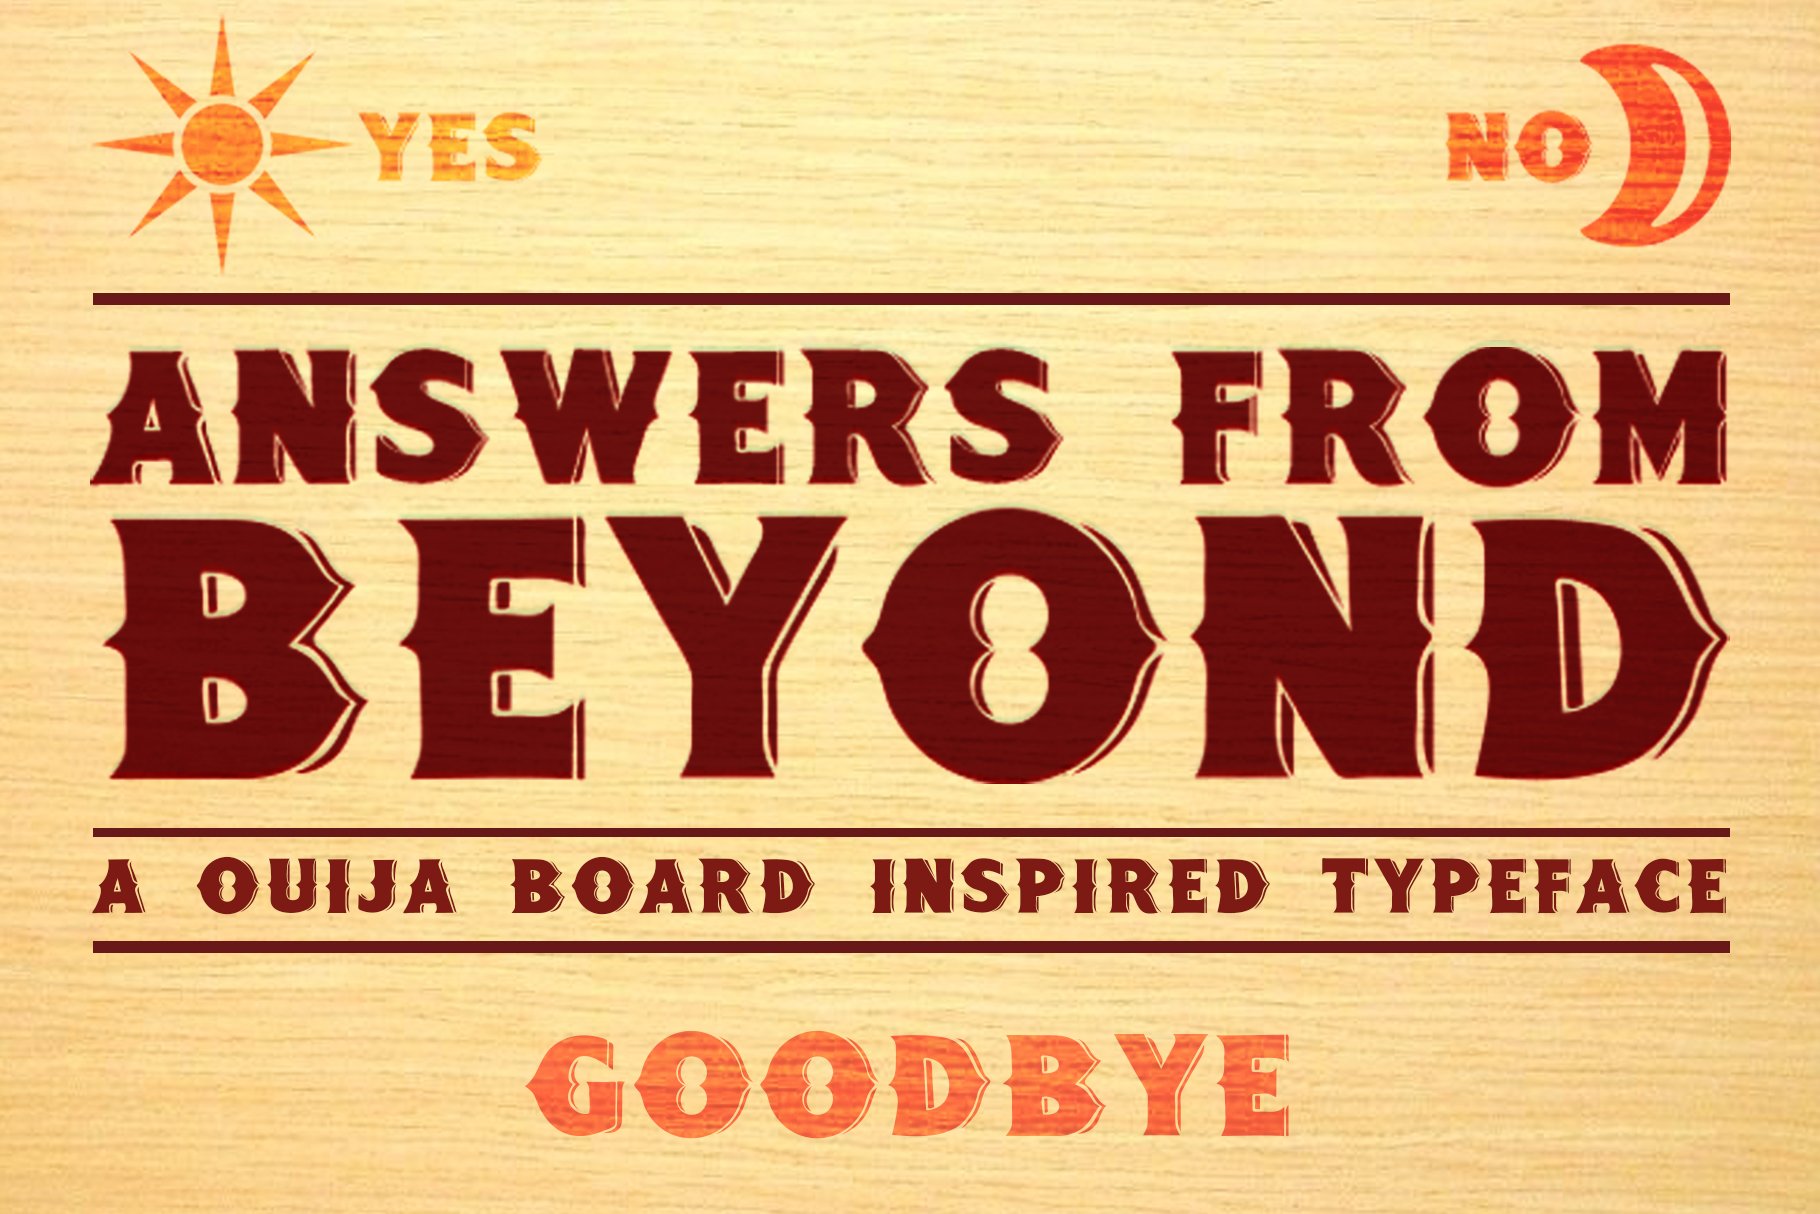 Answers From Beyond - Typeface cover image.